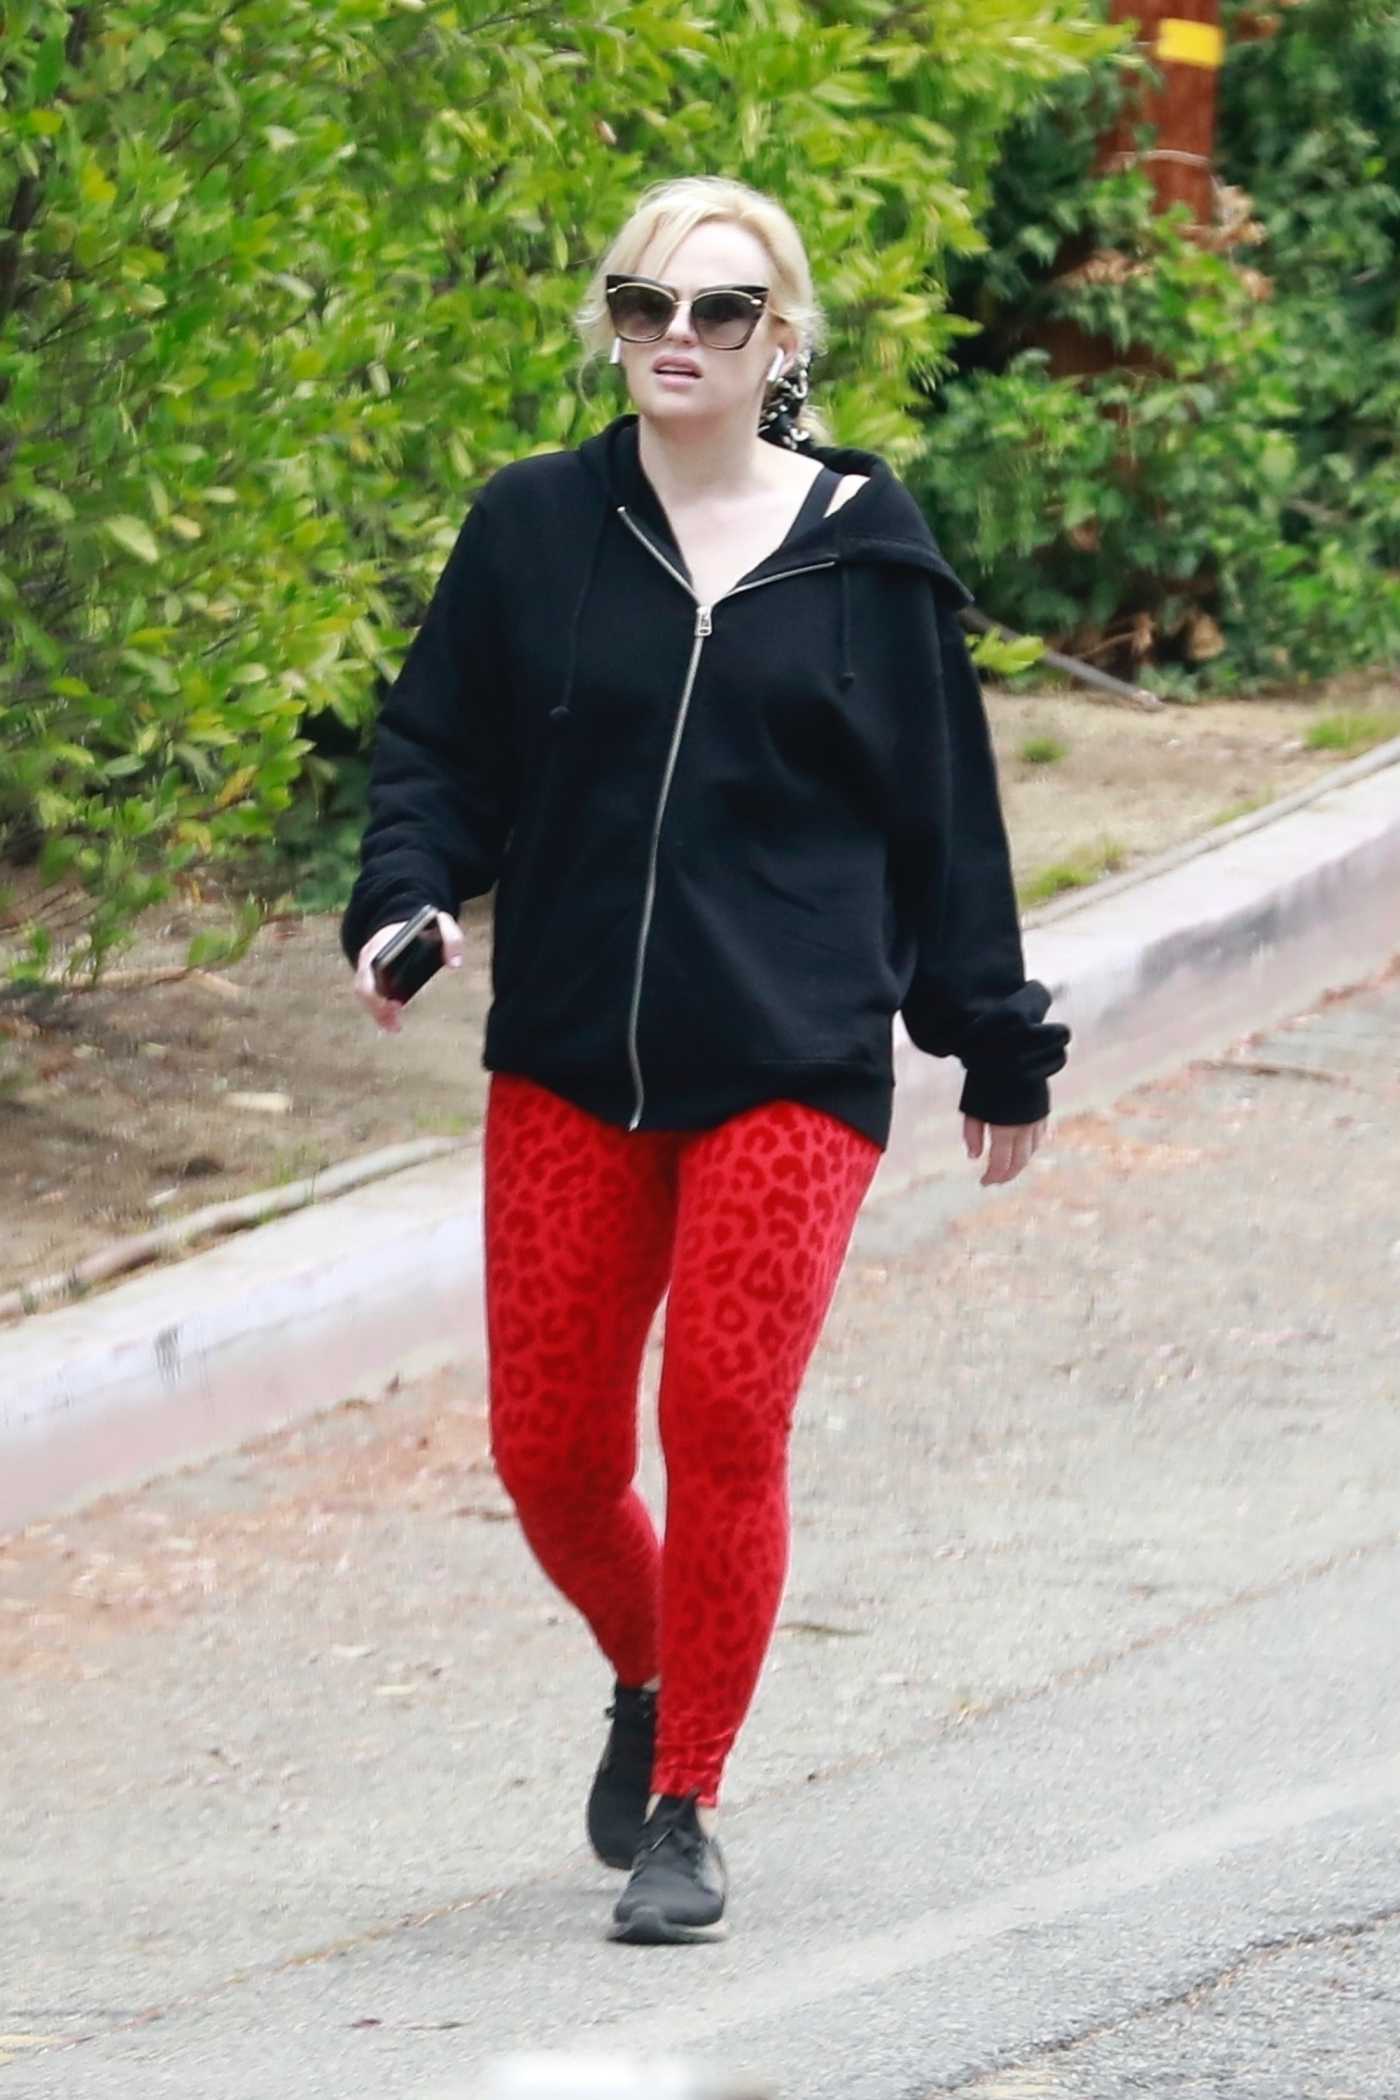 Rebel Wilson in a Red Animal Print Leggings Was Seen Out in Griffith Park in Los Angeles 05/17/2021